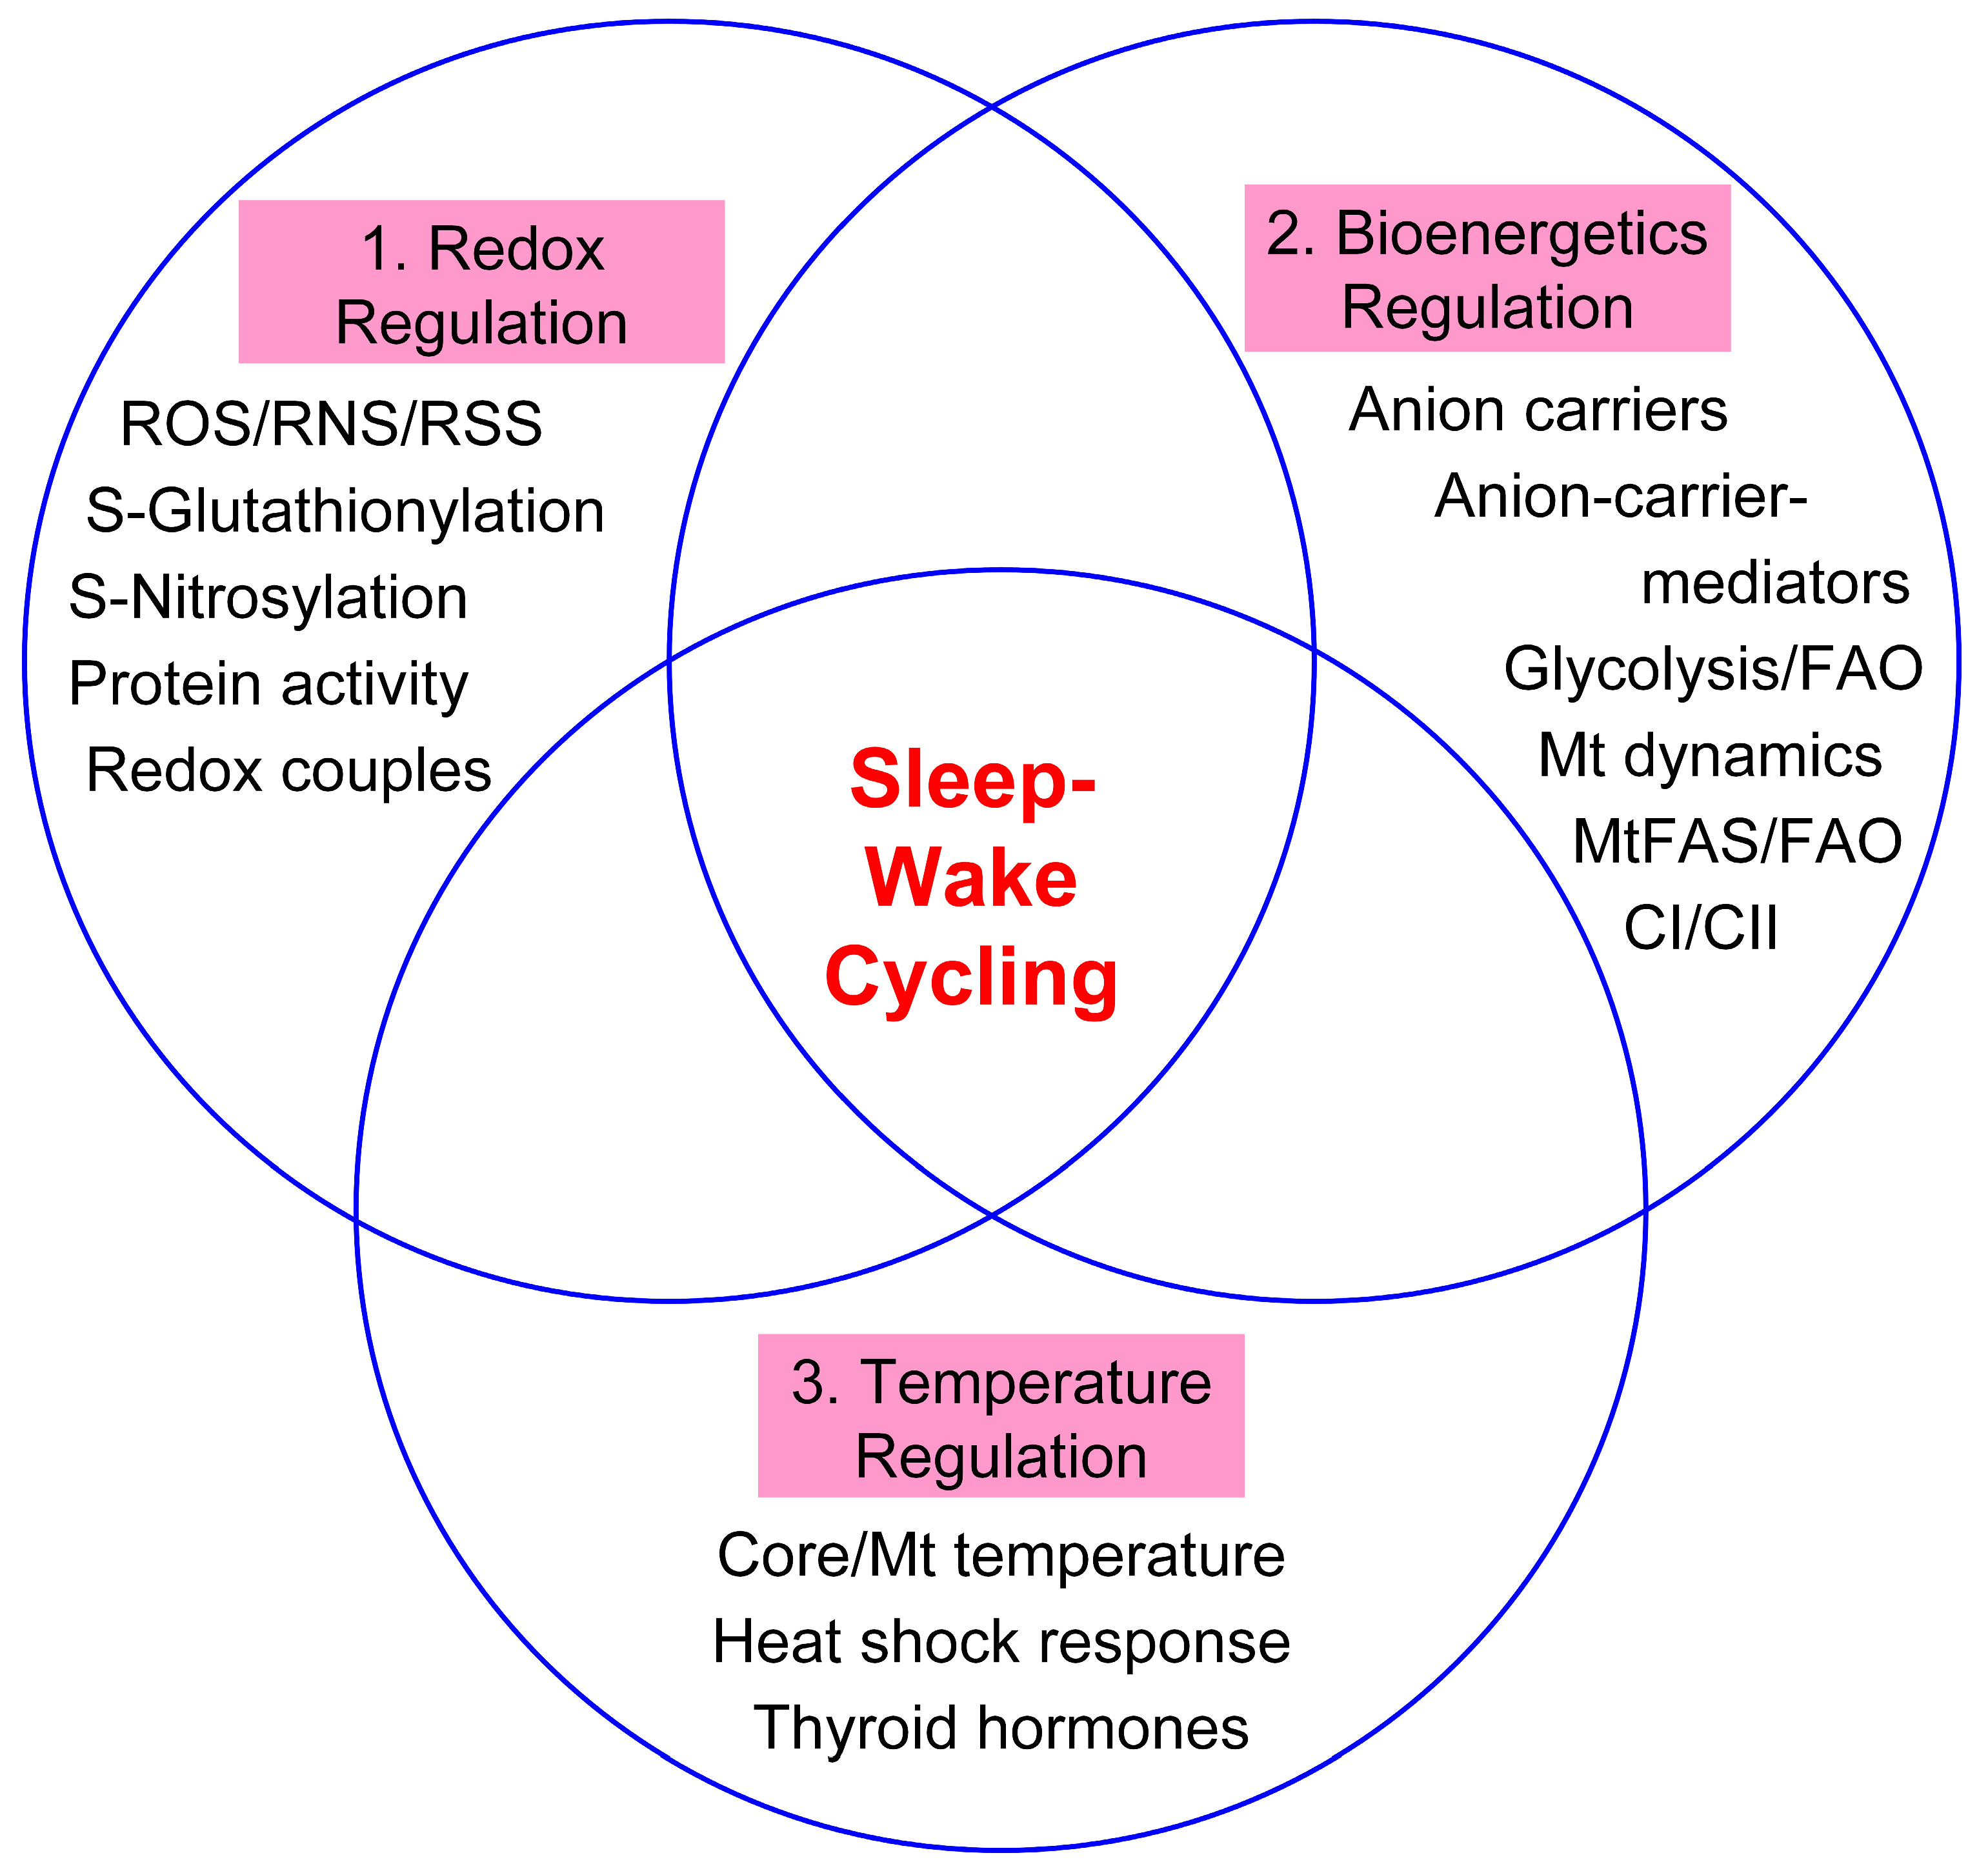 Antioxidants | Free Full-Text | Mitochondria Need Their Sleep: Redox,  Bioenergetics, and Temperature Regulation of Circadian Rhythms and the Role  of Cysteine-Mediated Redox Signaling, Uncoupling Proteins, and Substrate  Cycles